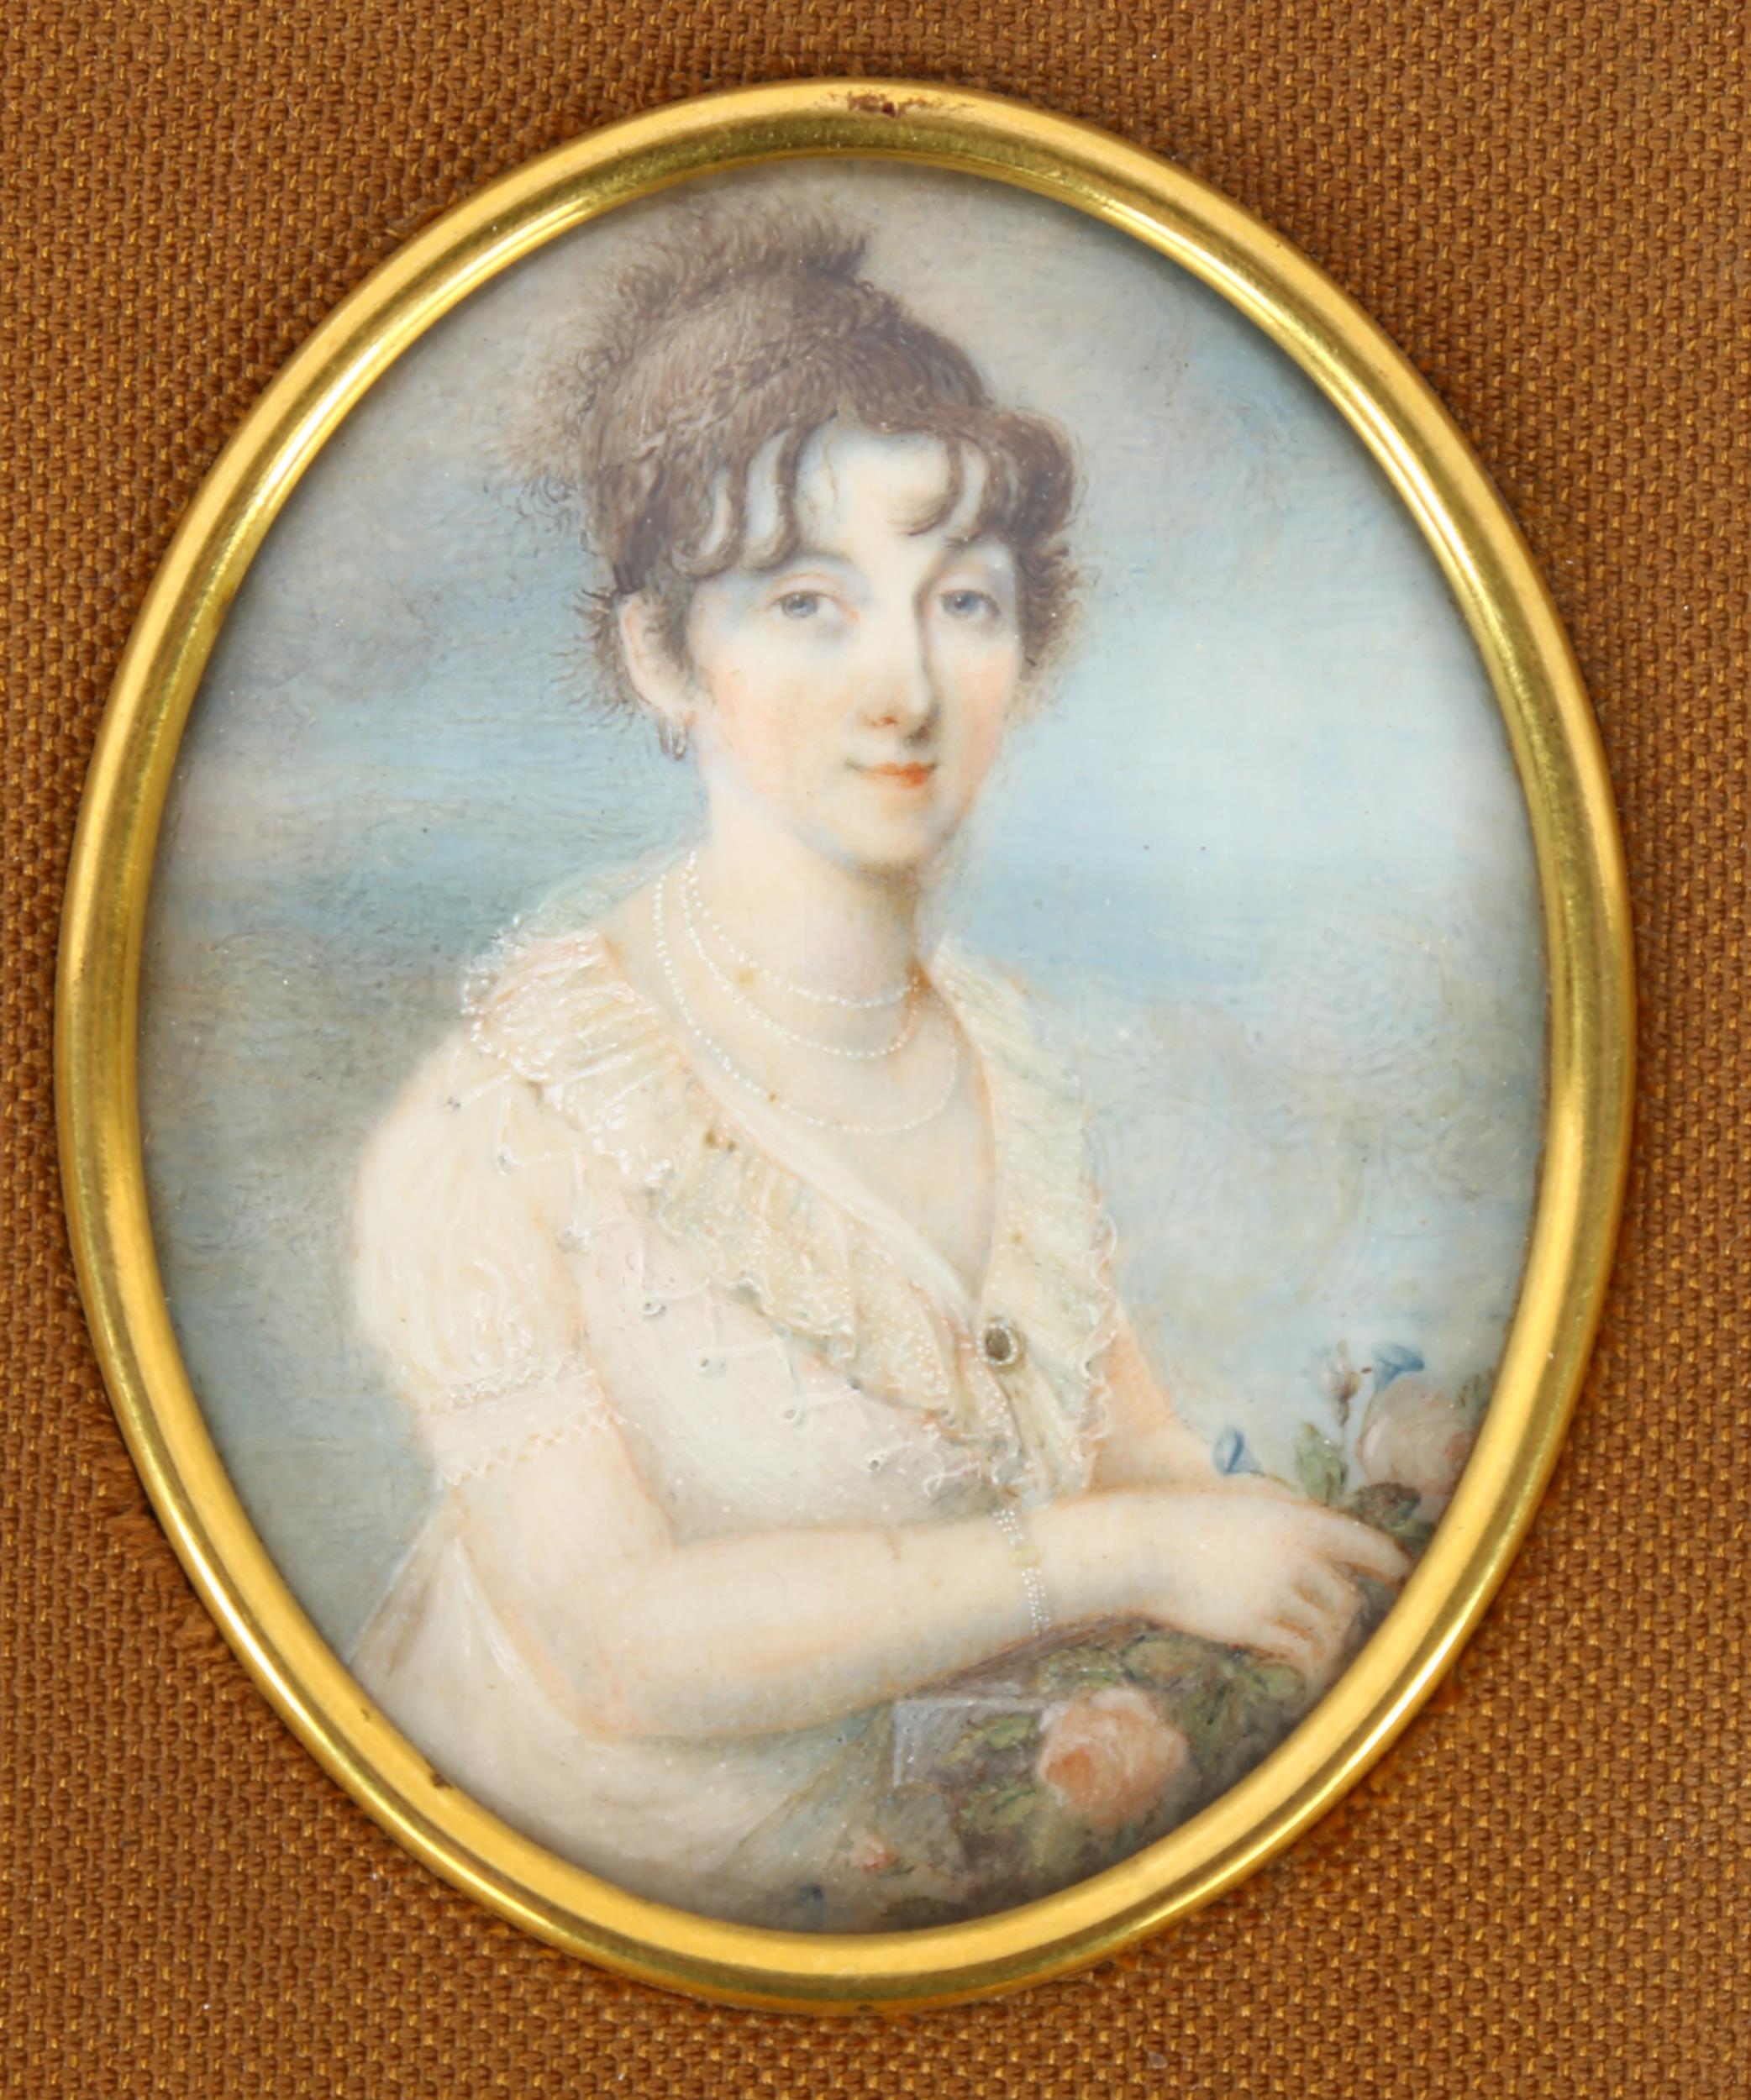 3 x 18th/19th century miniature painted portraits on ivory, all unsigned, brass-mounted fabric- - Image 4 of 4